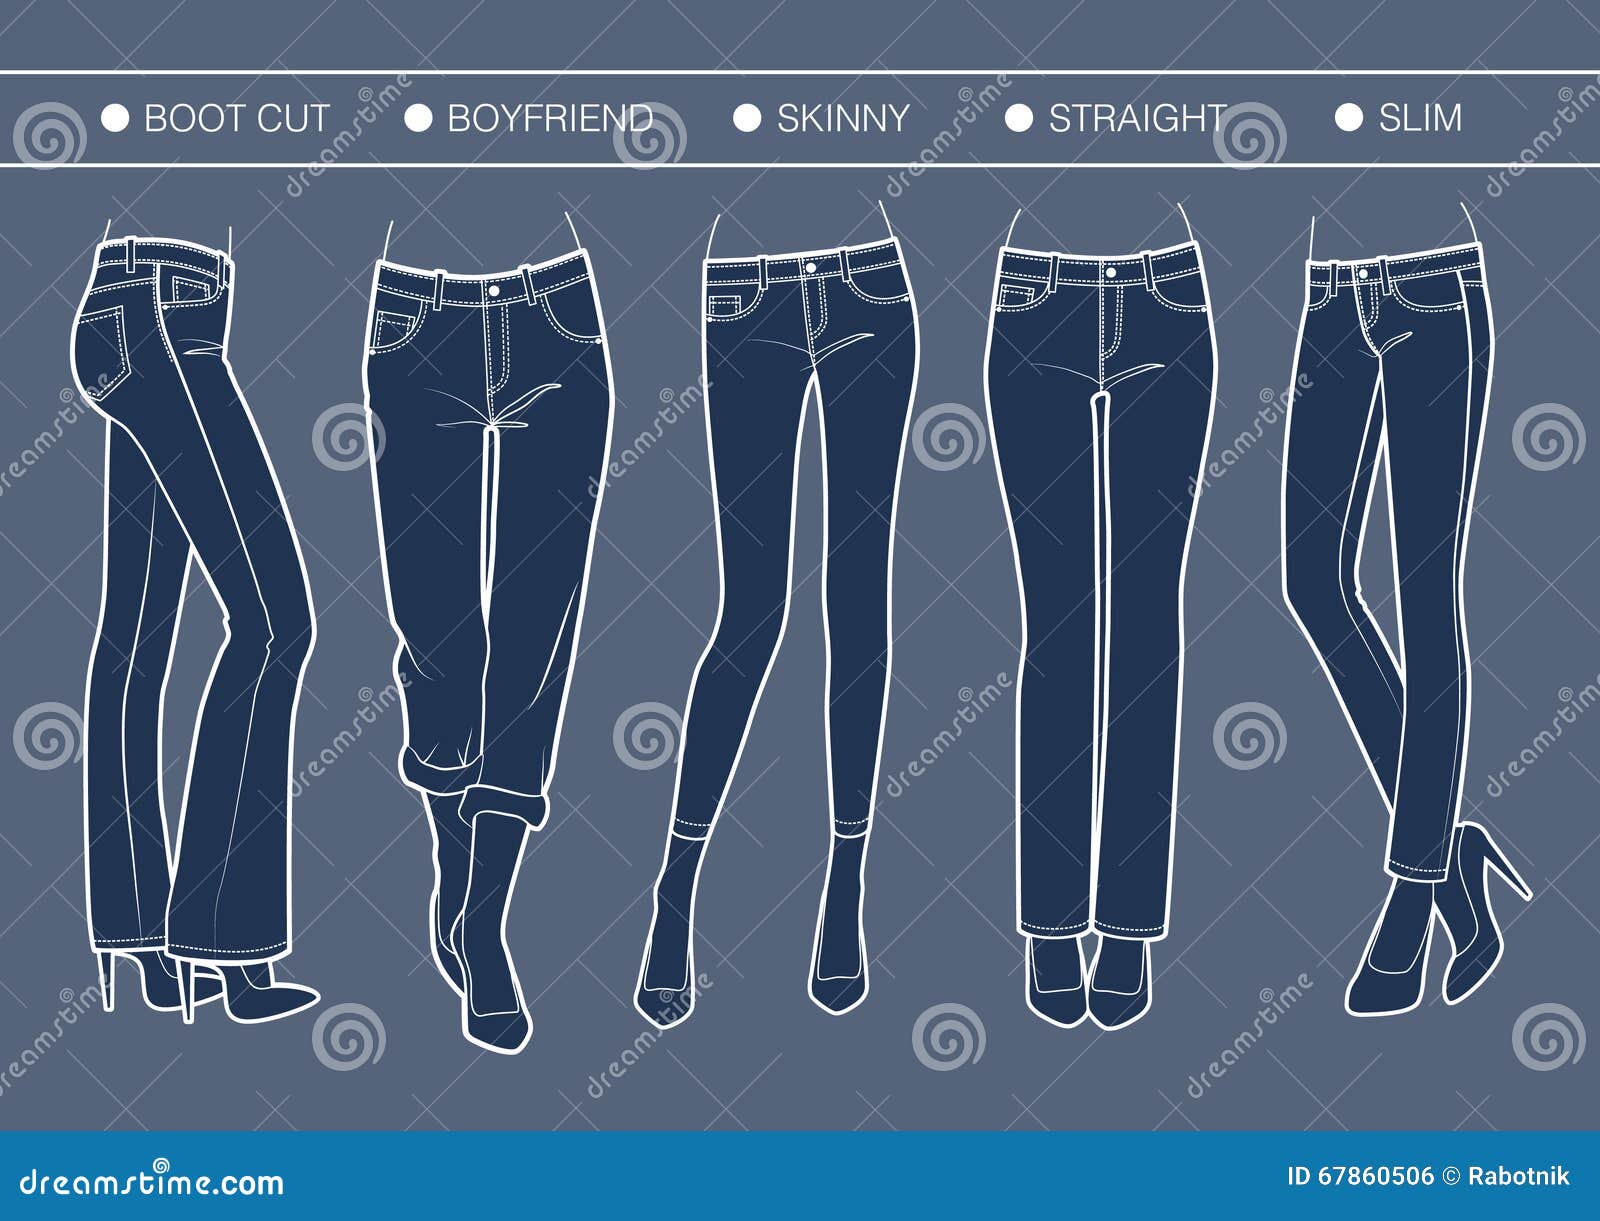 Get Perfect Jeans For Your Body Type Jeans Fit Guide